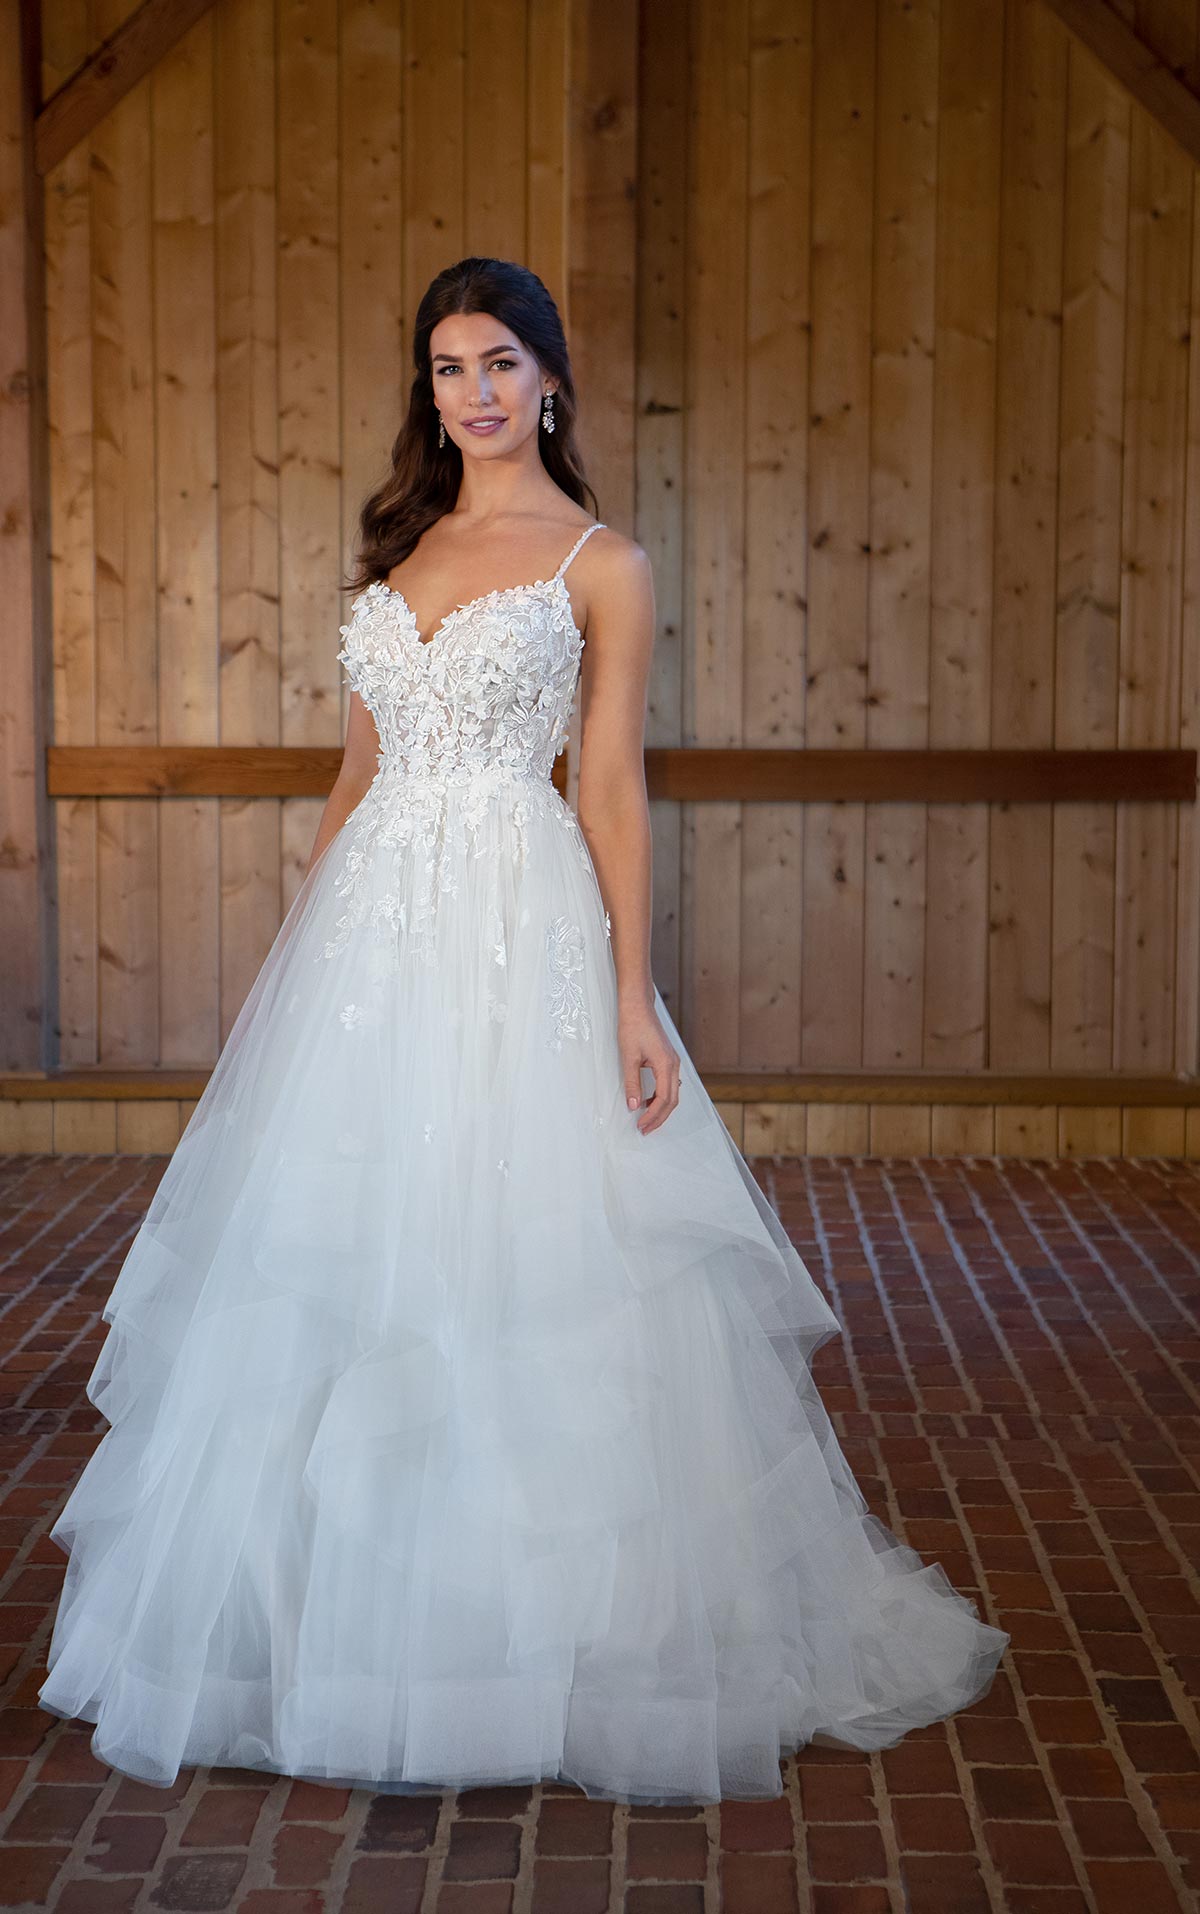 Tulle Ball Gown Wedding Dress With Sweetheart Neckline And Spaghetti Straps Kleinfeld Bridal 0904